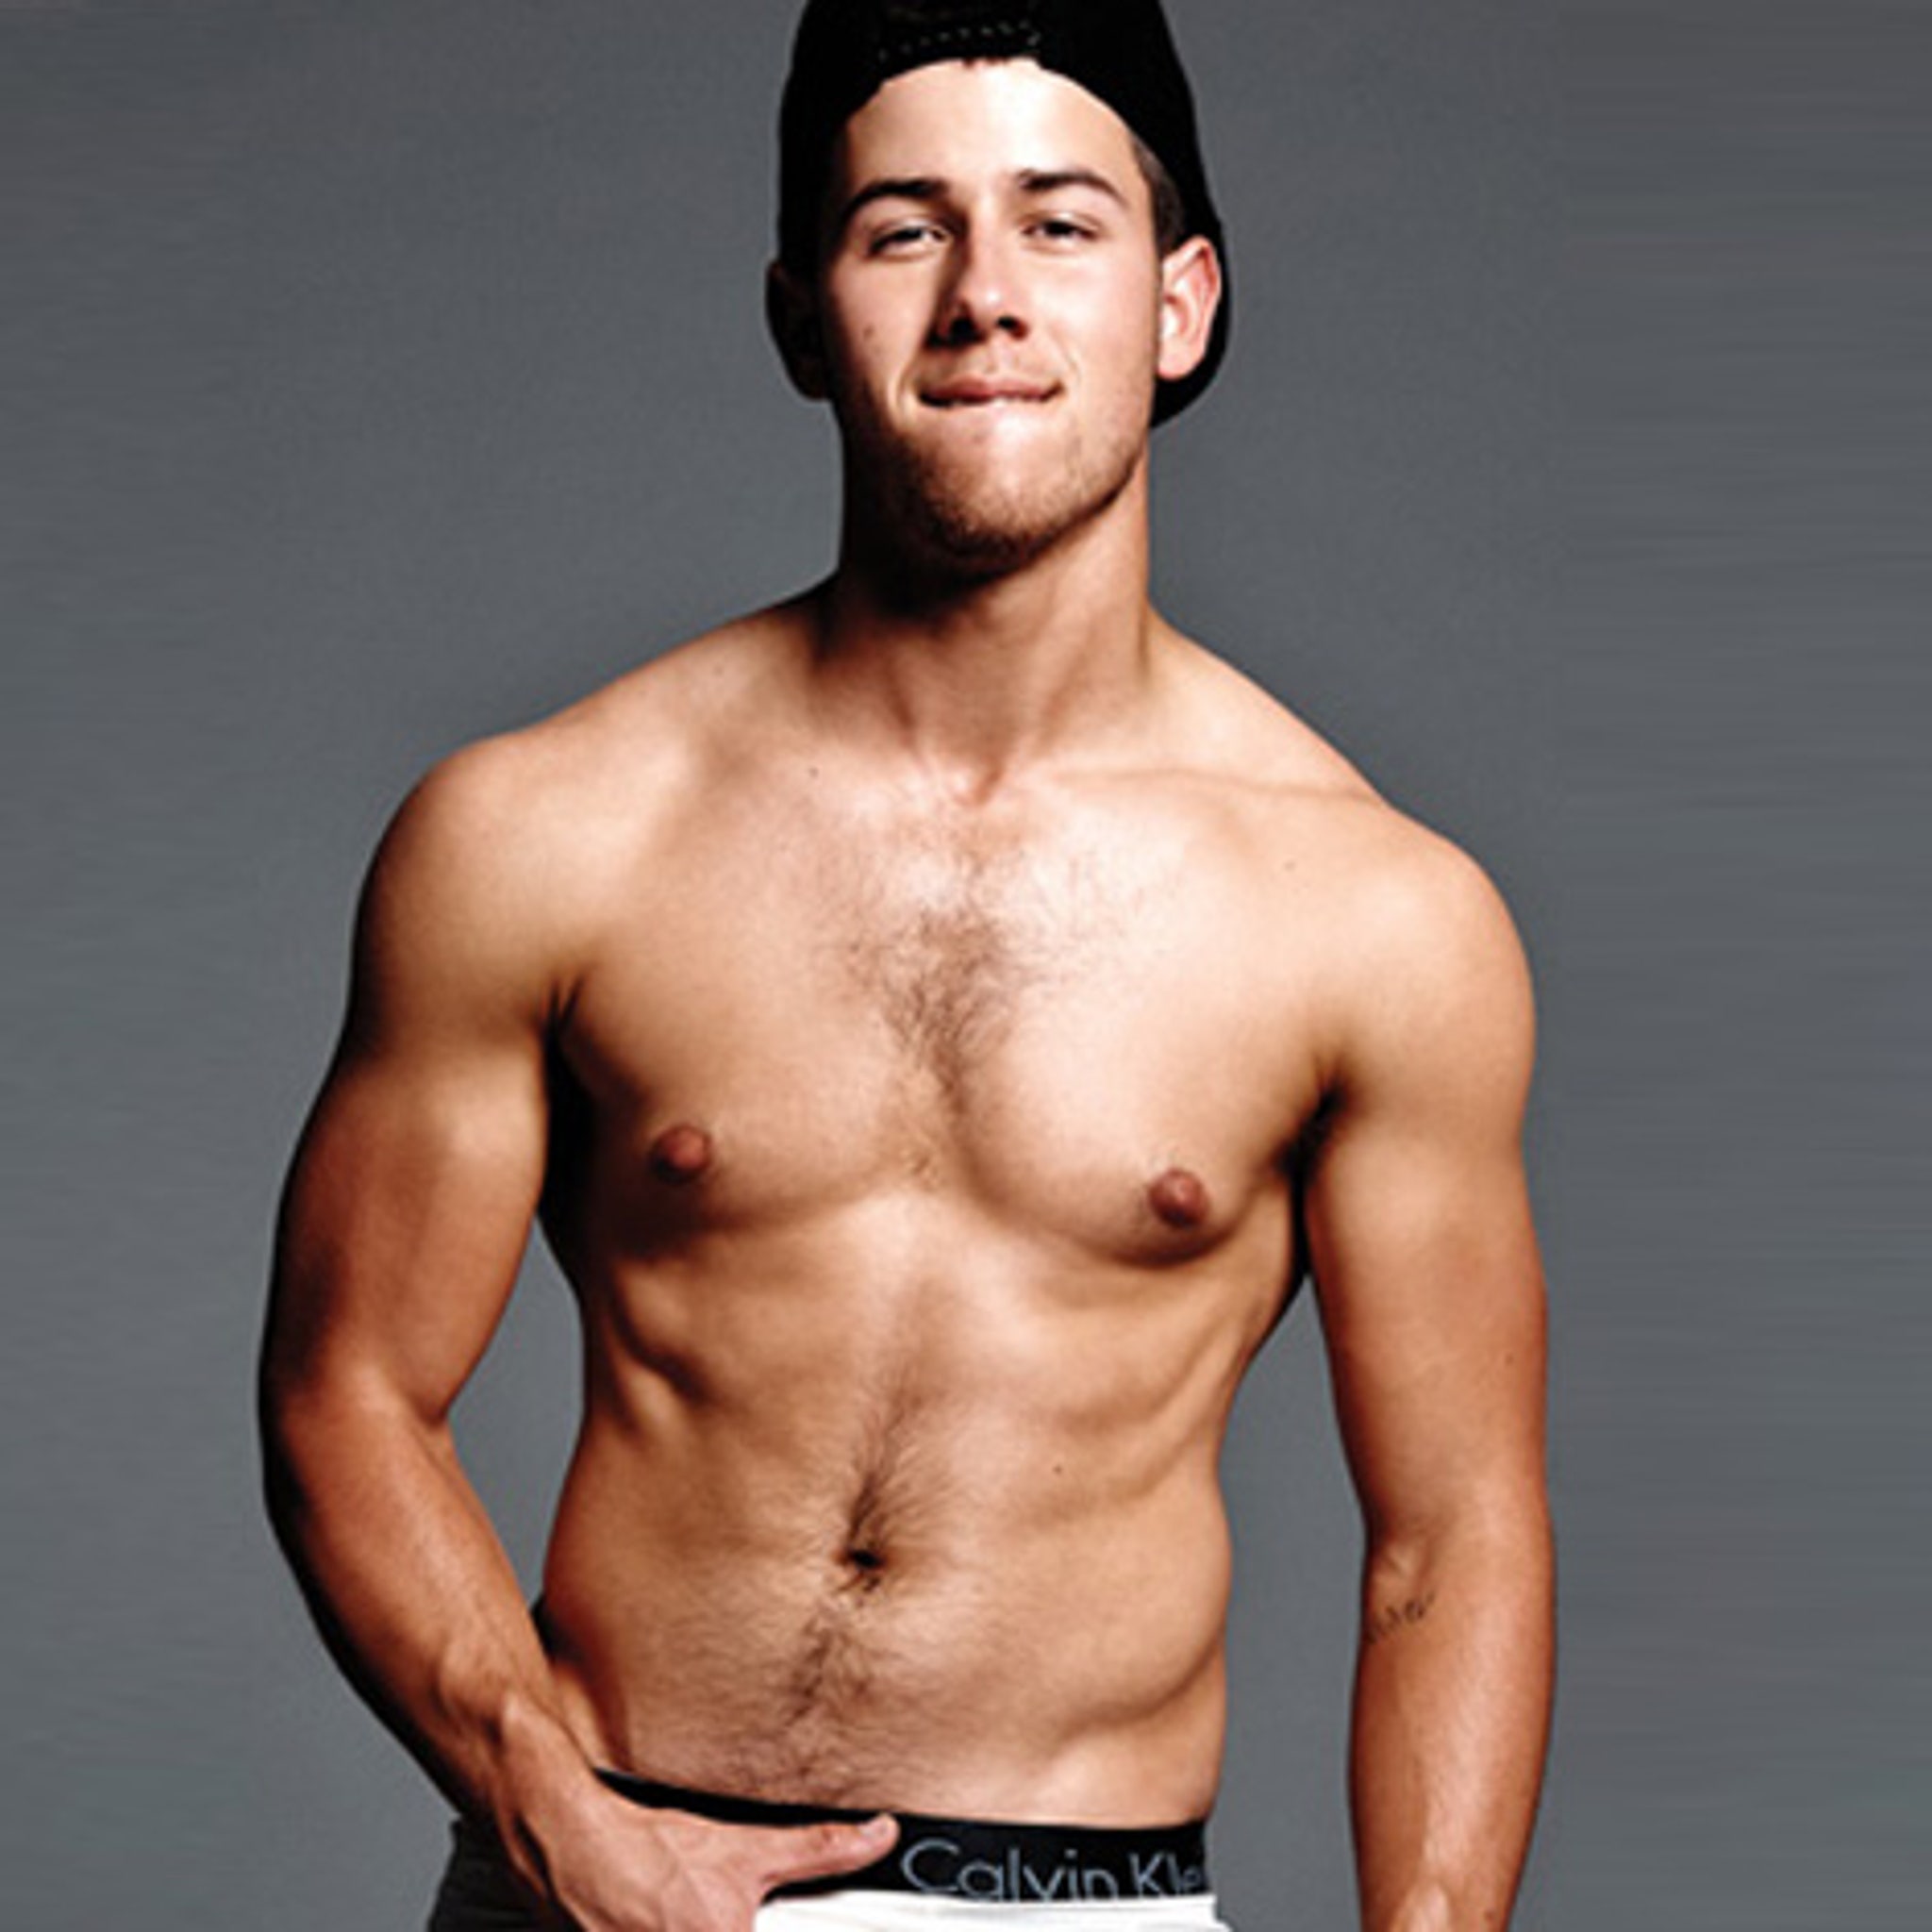 Nick Jonas Insinuates Underwear Pics Led to Boost In Record Sales